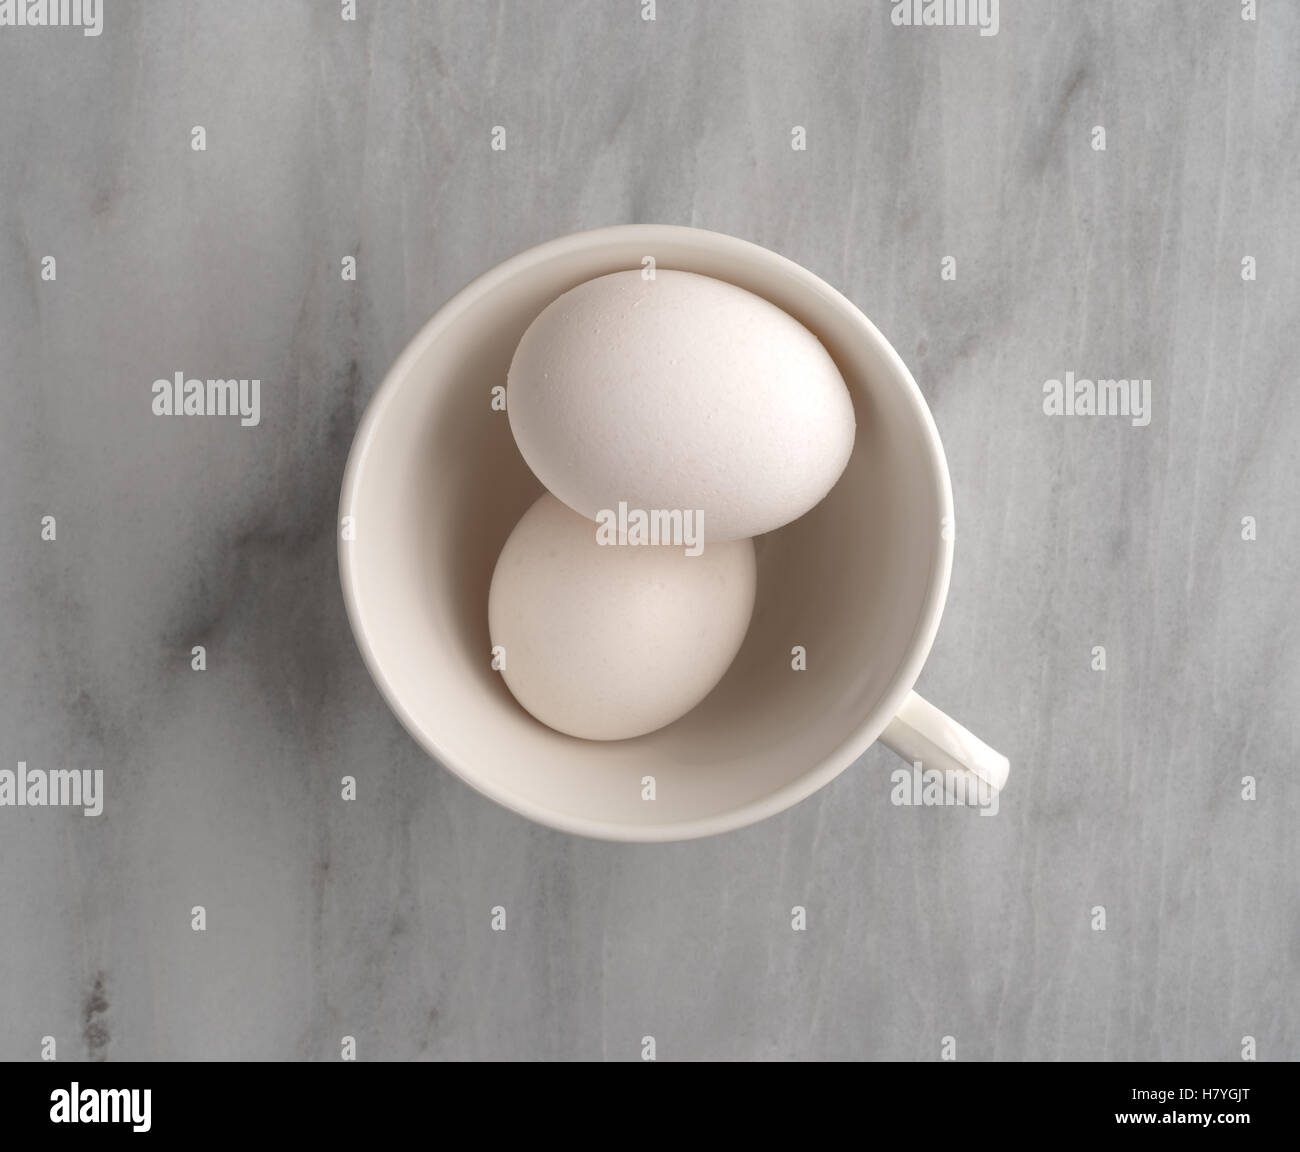 Top view of two eggs in a white cup on a gray marble cutting board. Stock Photo